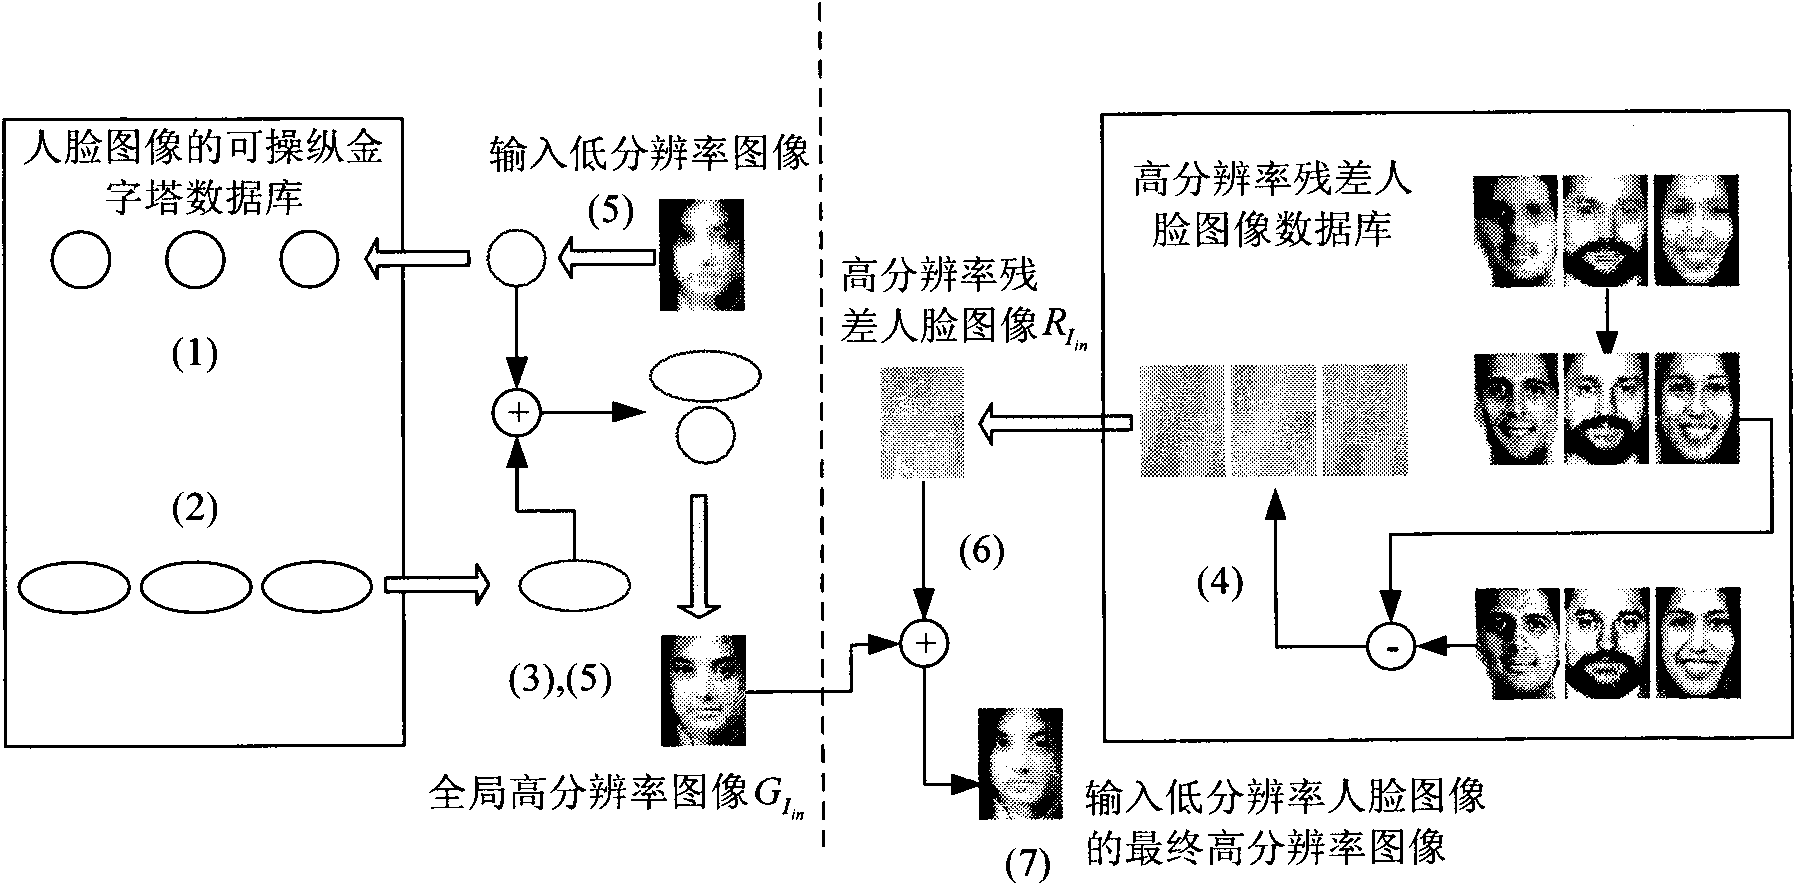 Super-resolution processing method of face image integrating global feature with local information